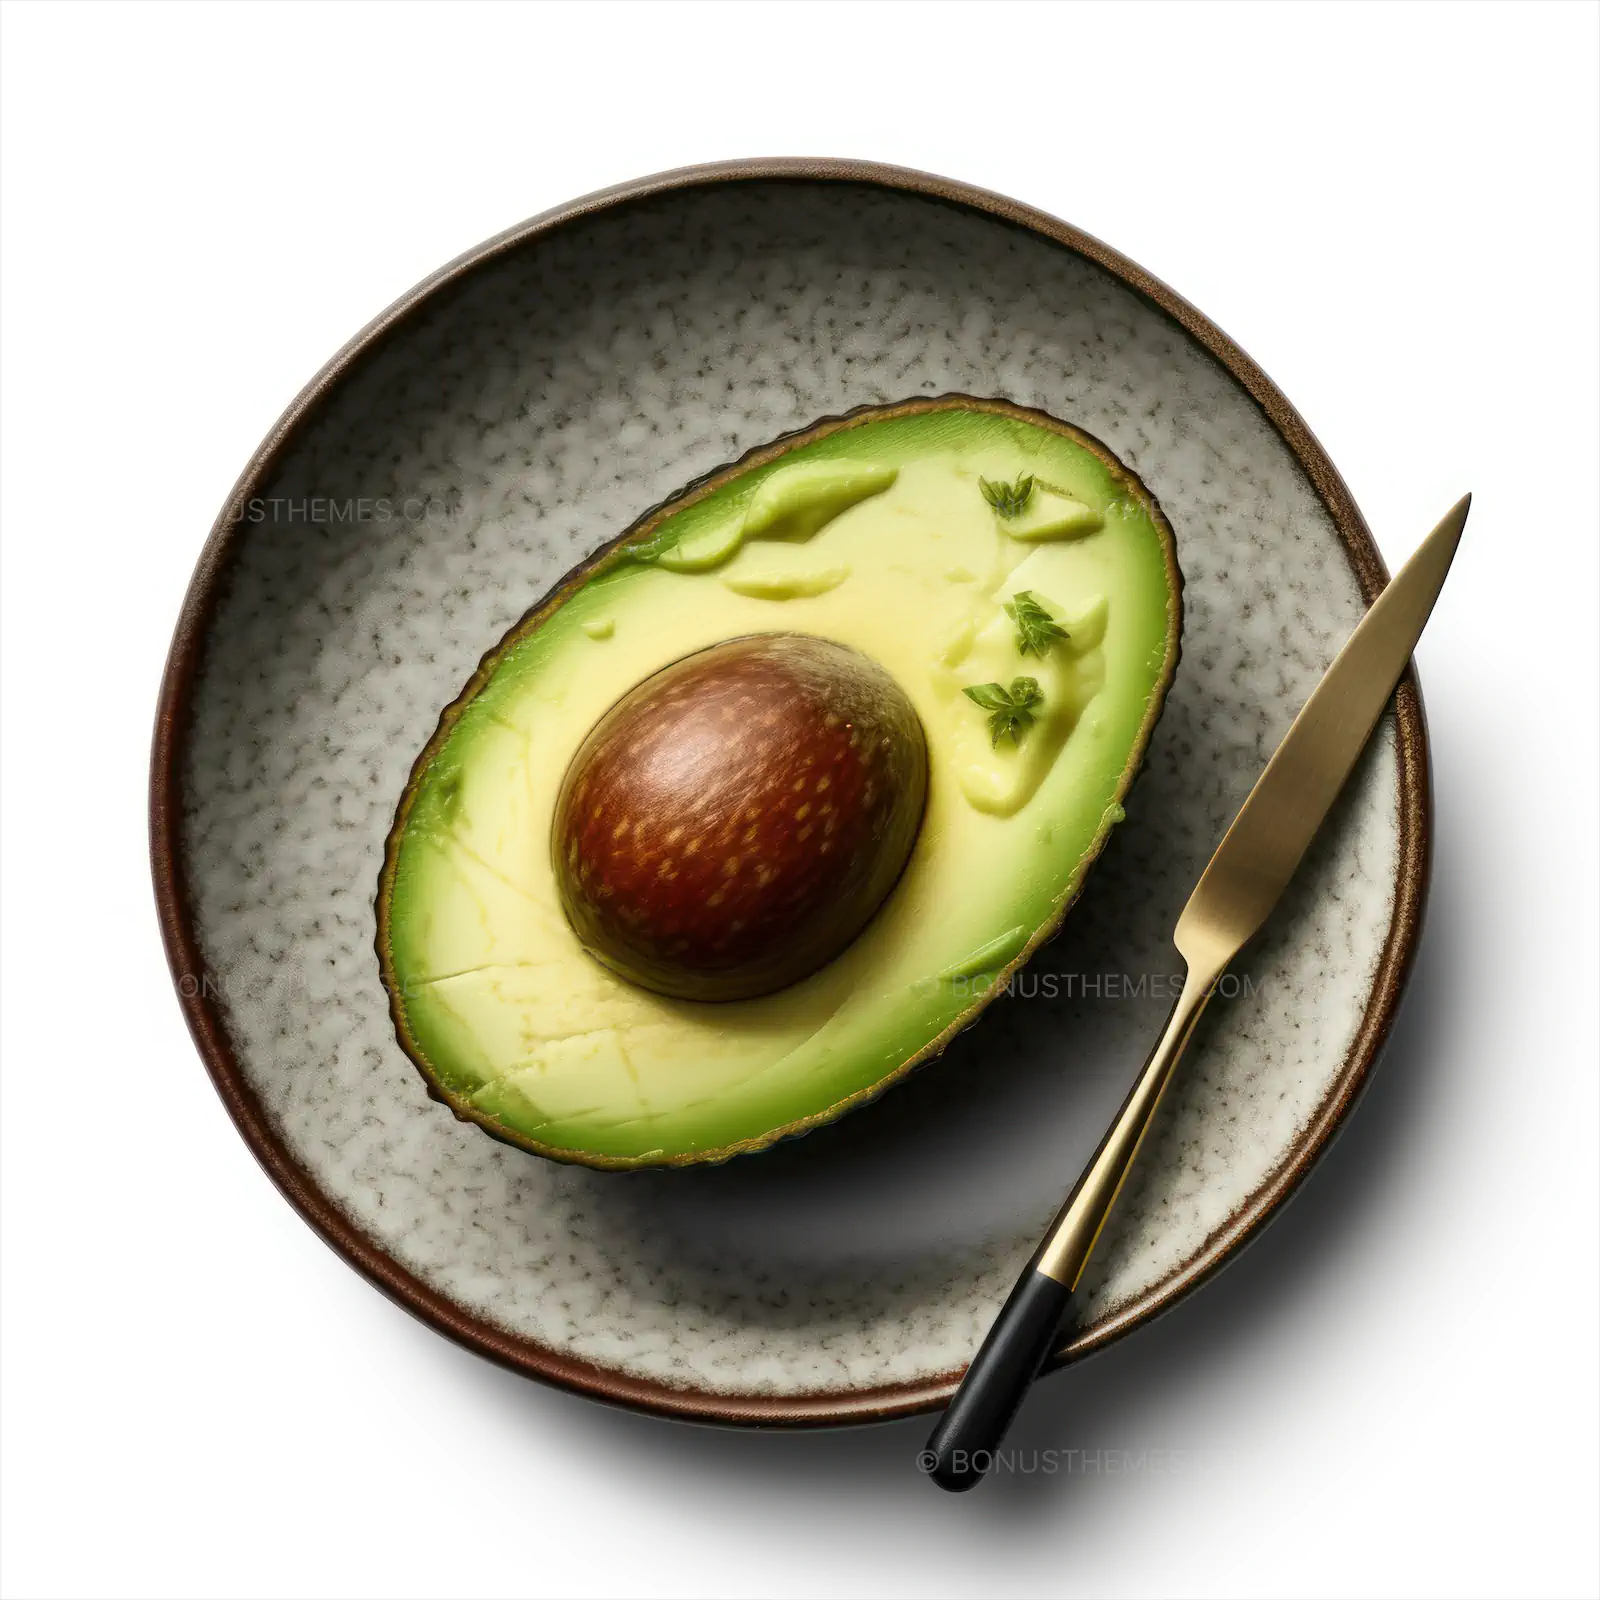 Avocado fruit on a plate from top view